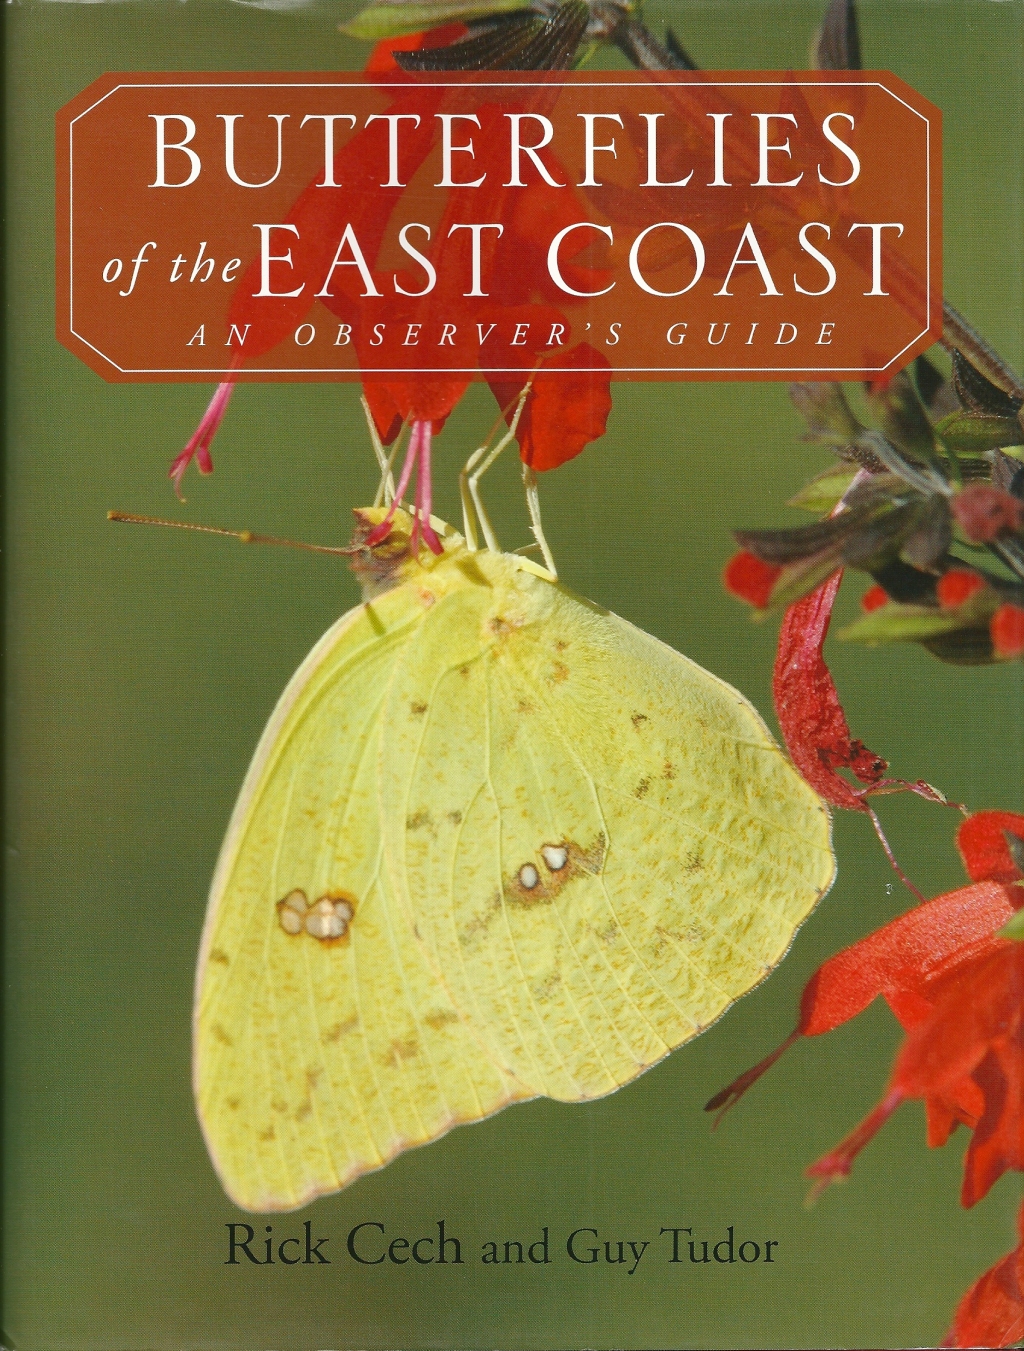 BOOK REVIEW: “Butterflies Of The East Coast: An Observer’s Guide”